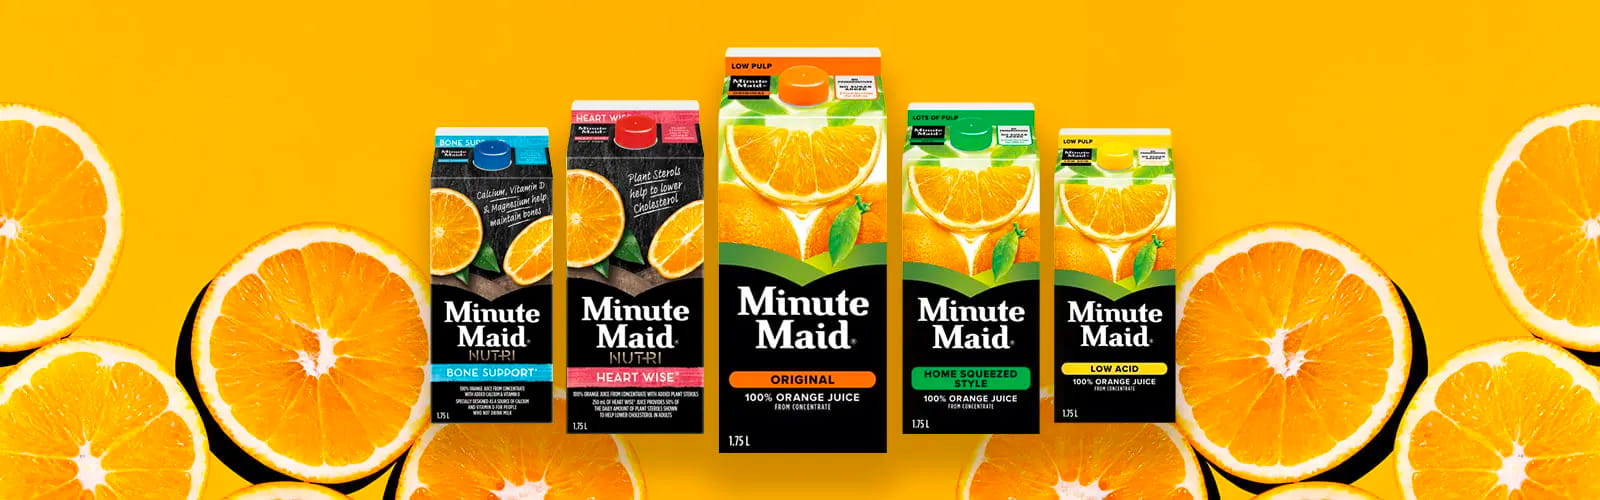 Minute Maid products and sliced oranges